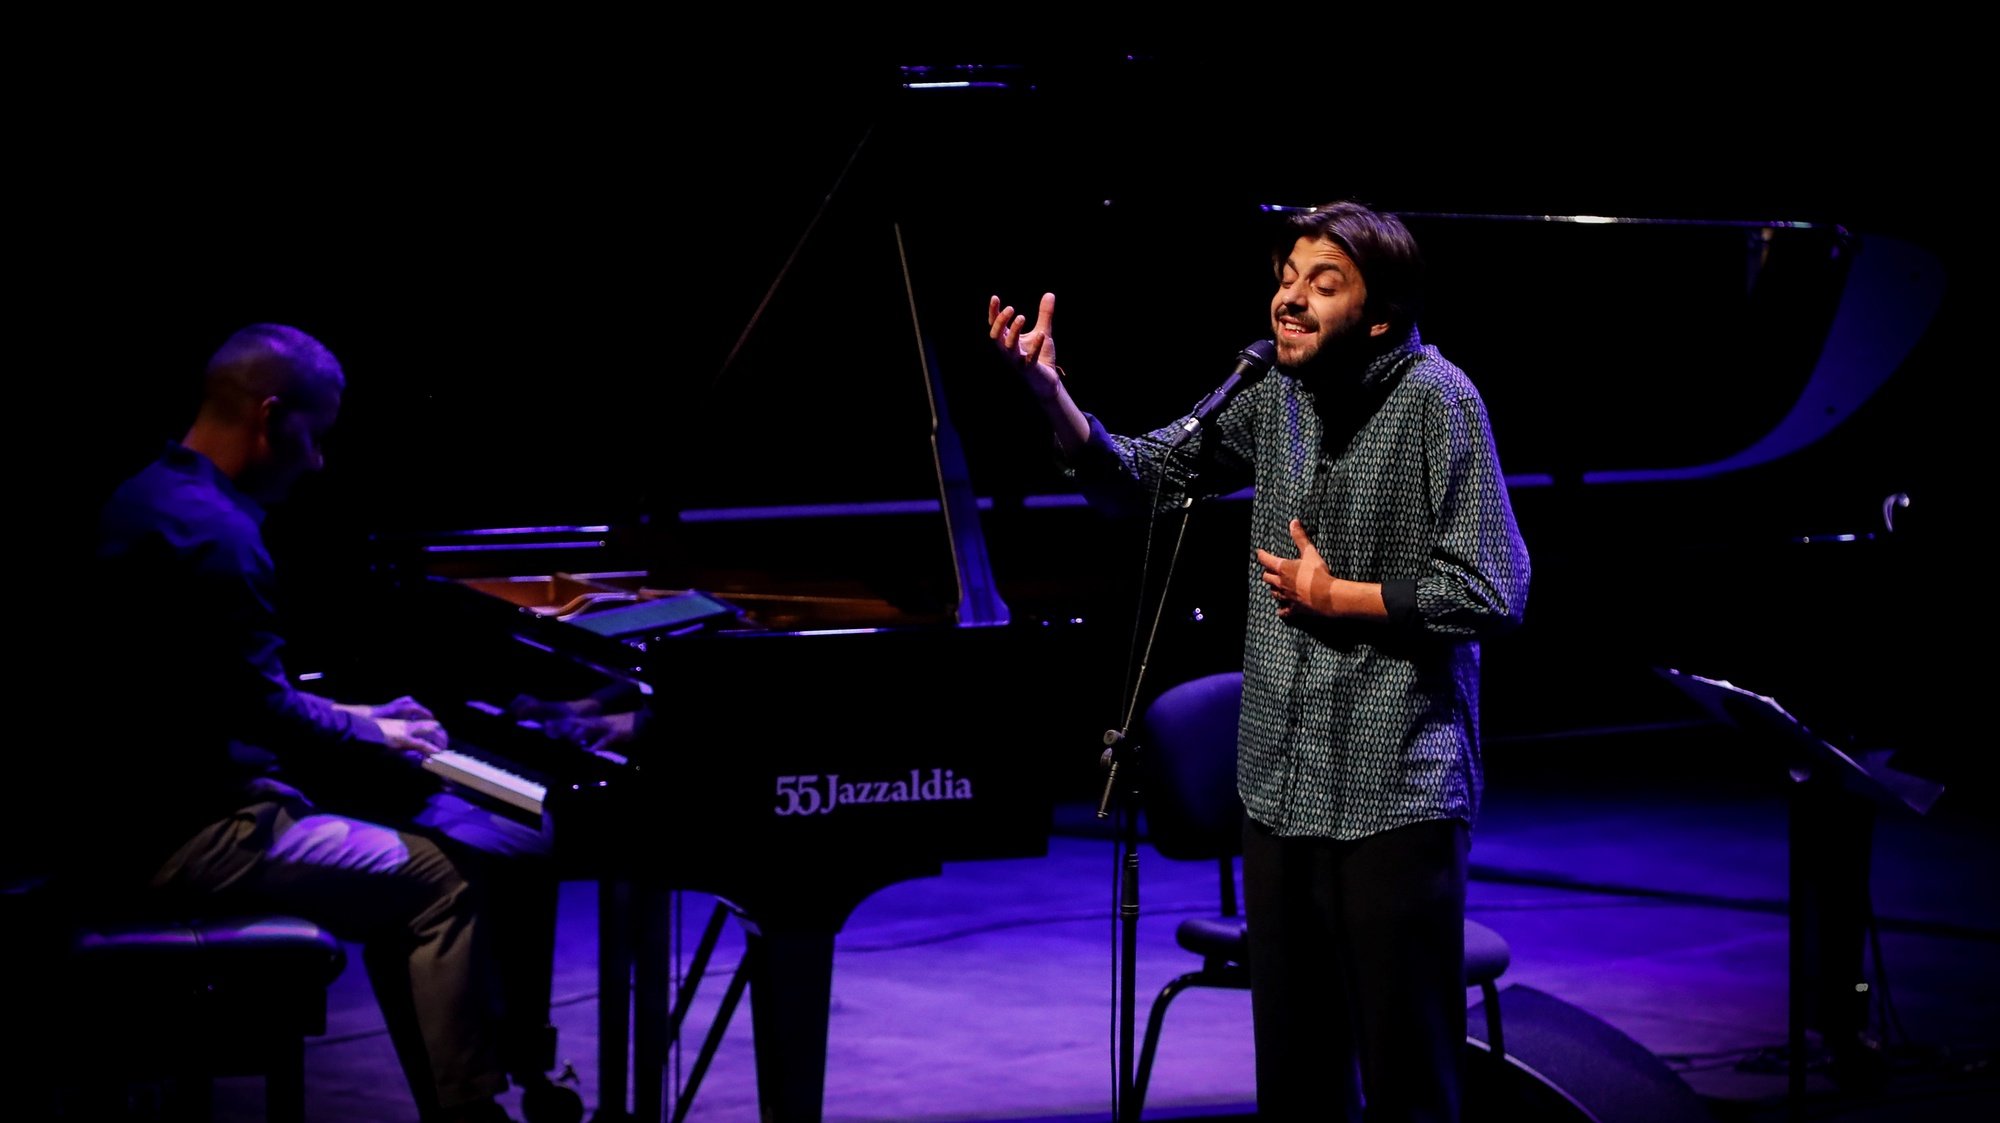 epa08563951 Portuguese singer Salvador Sobral (R), the winner of the 2017 Eurovision Song Contest,  performs at the Kursaal Congress Center and Auditorium in San Sebastian, northern Spain, 24 July 2020. The performance was part of the 55th edition of the San Sebastian Jazz Festival (officially titled &#039;Heineken Jazzaldia&#039;), which runs from 22-26 July.  EPA/JAVIER ETXEZARRETA